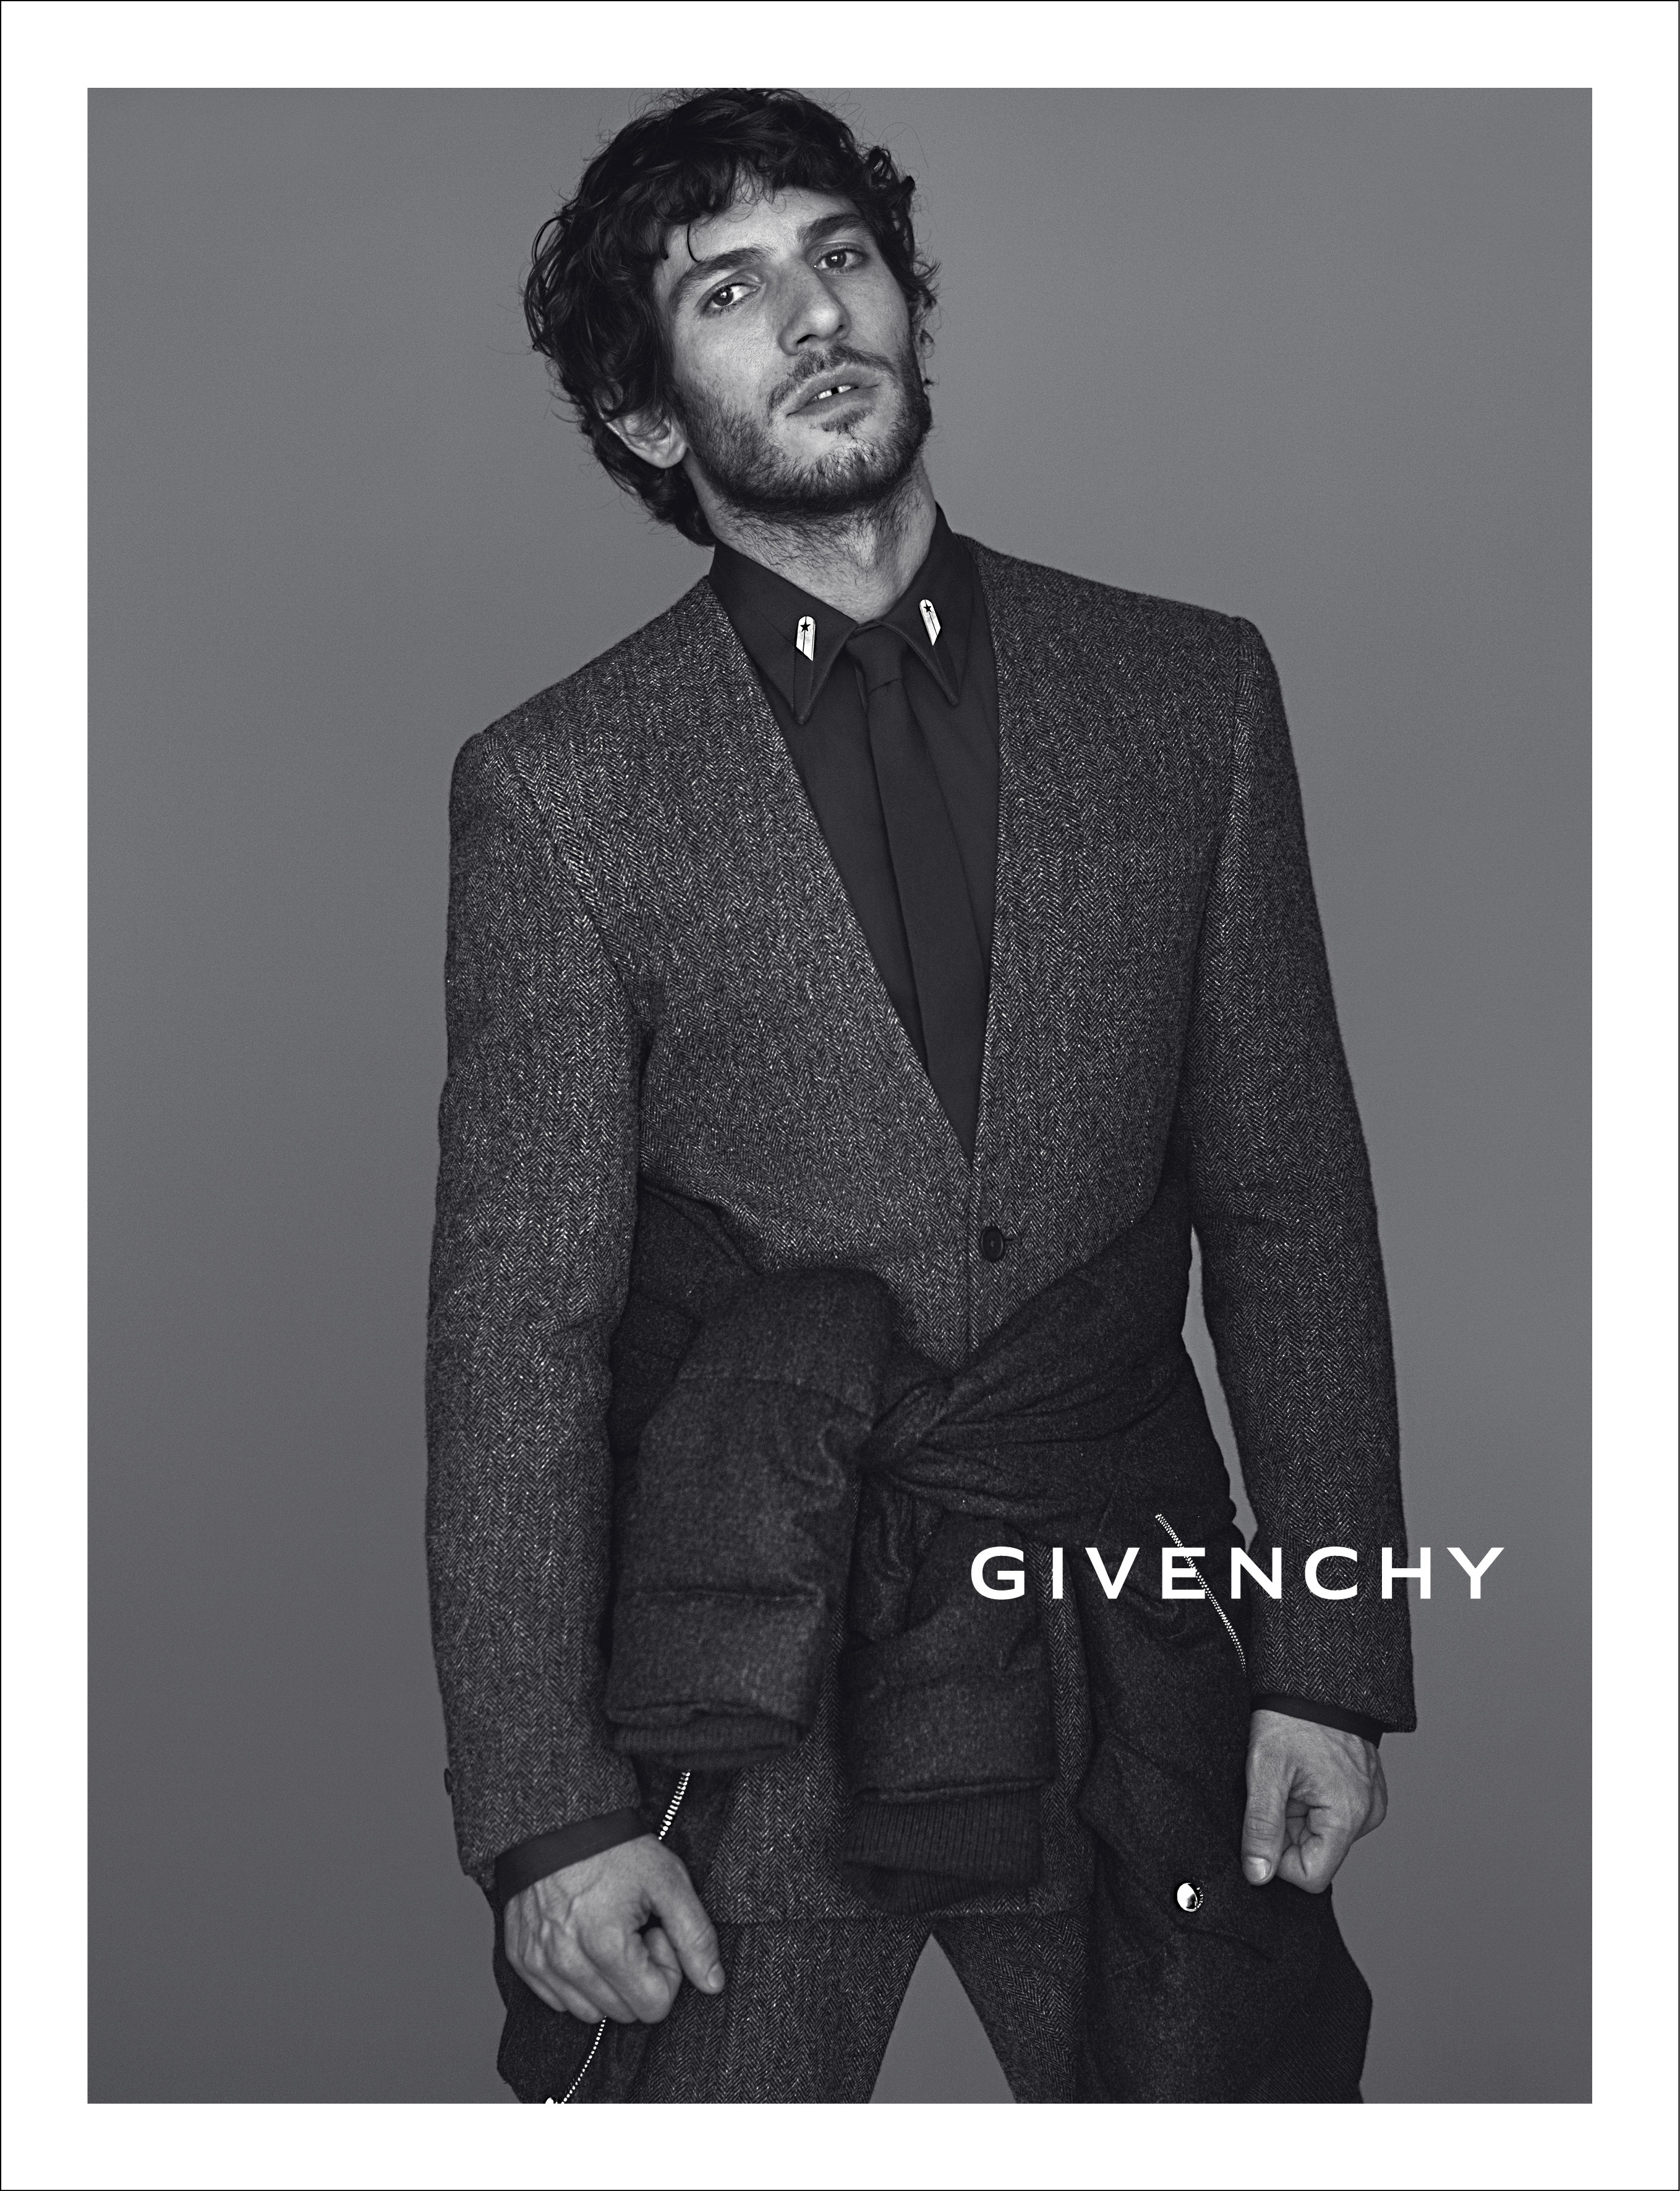 Quim Givenchy